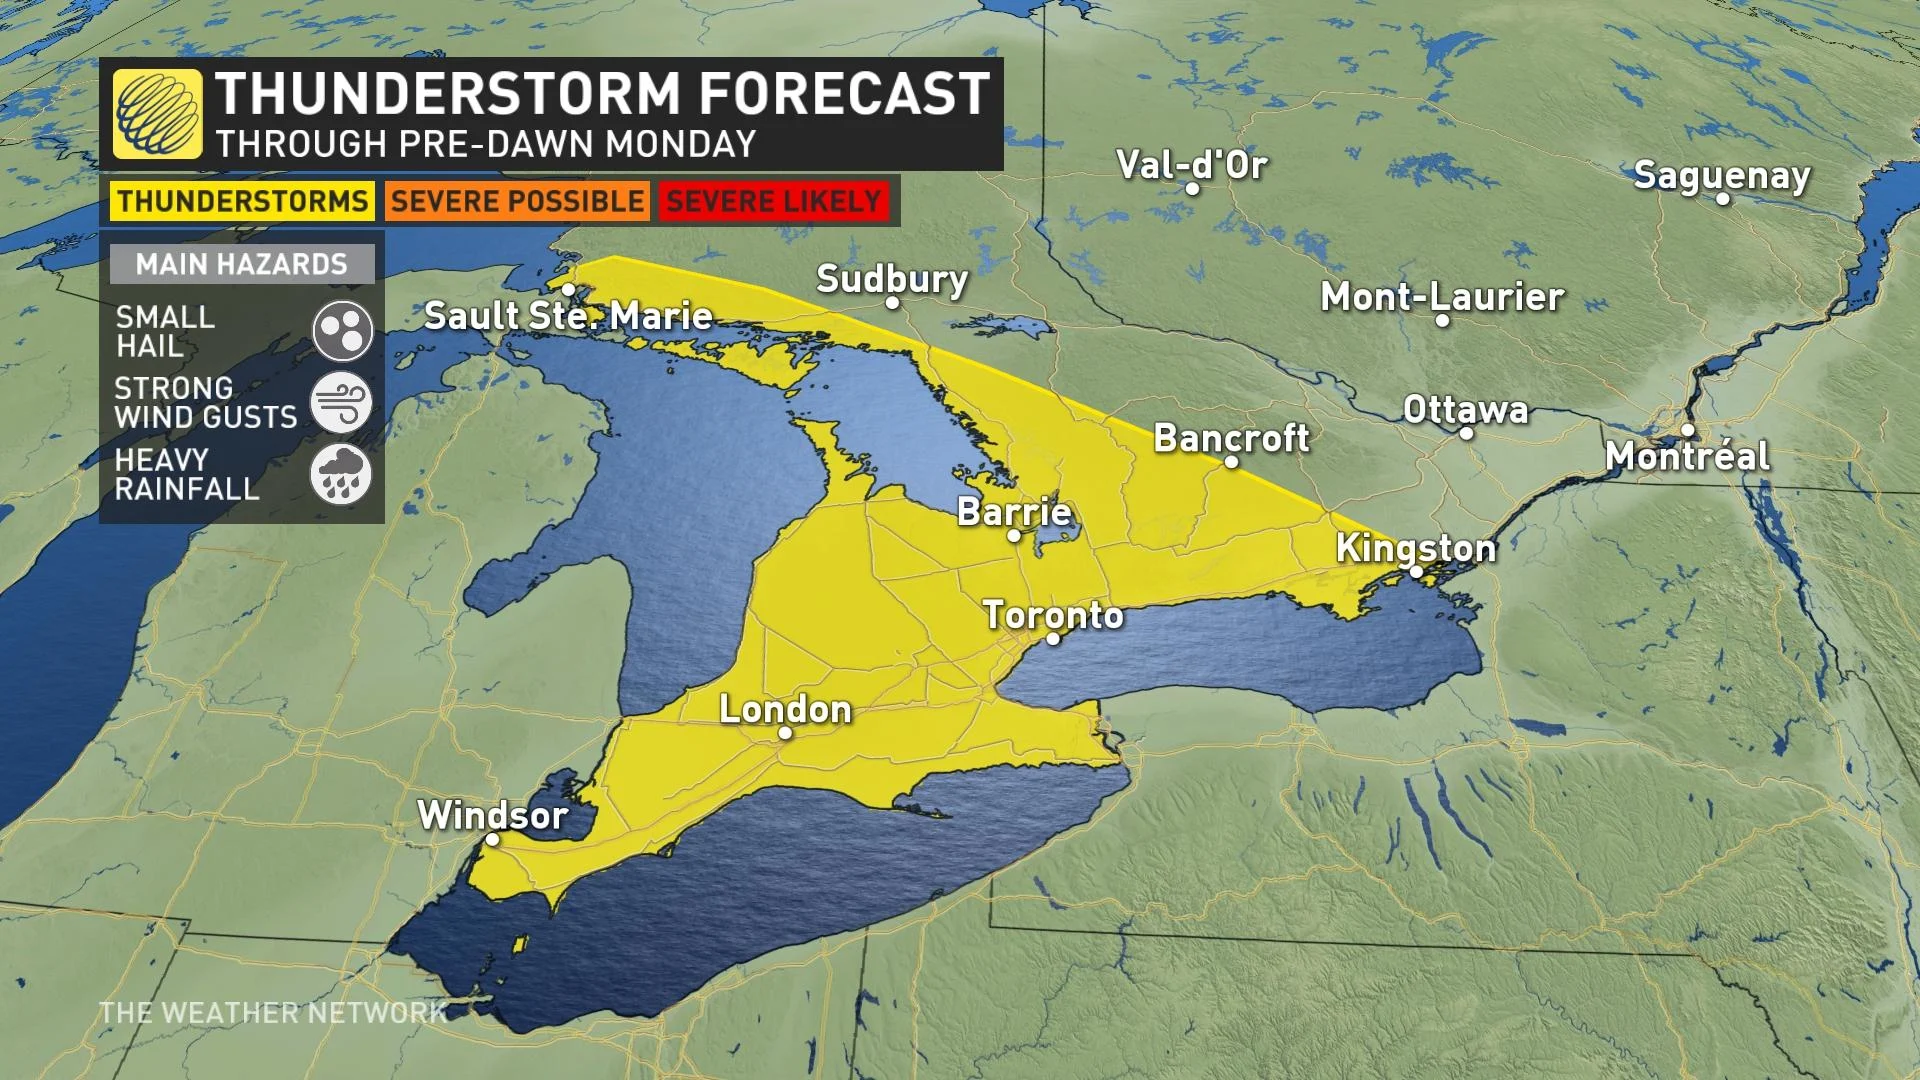 Ontario storm risk map Sunday overnight into Monday pre-dawn_May 26